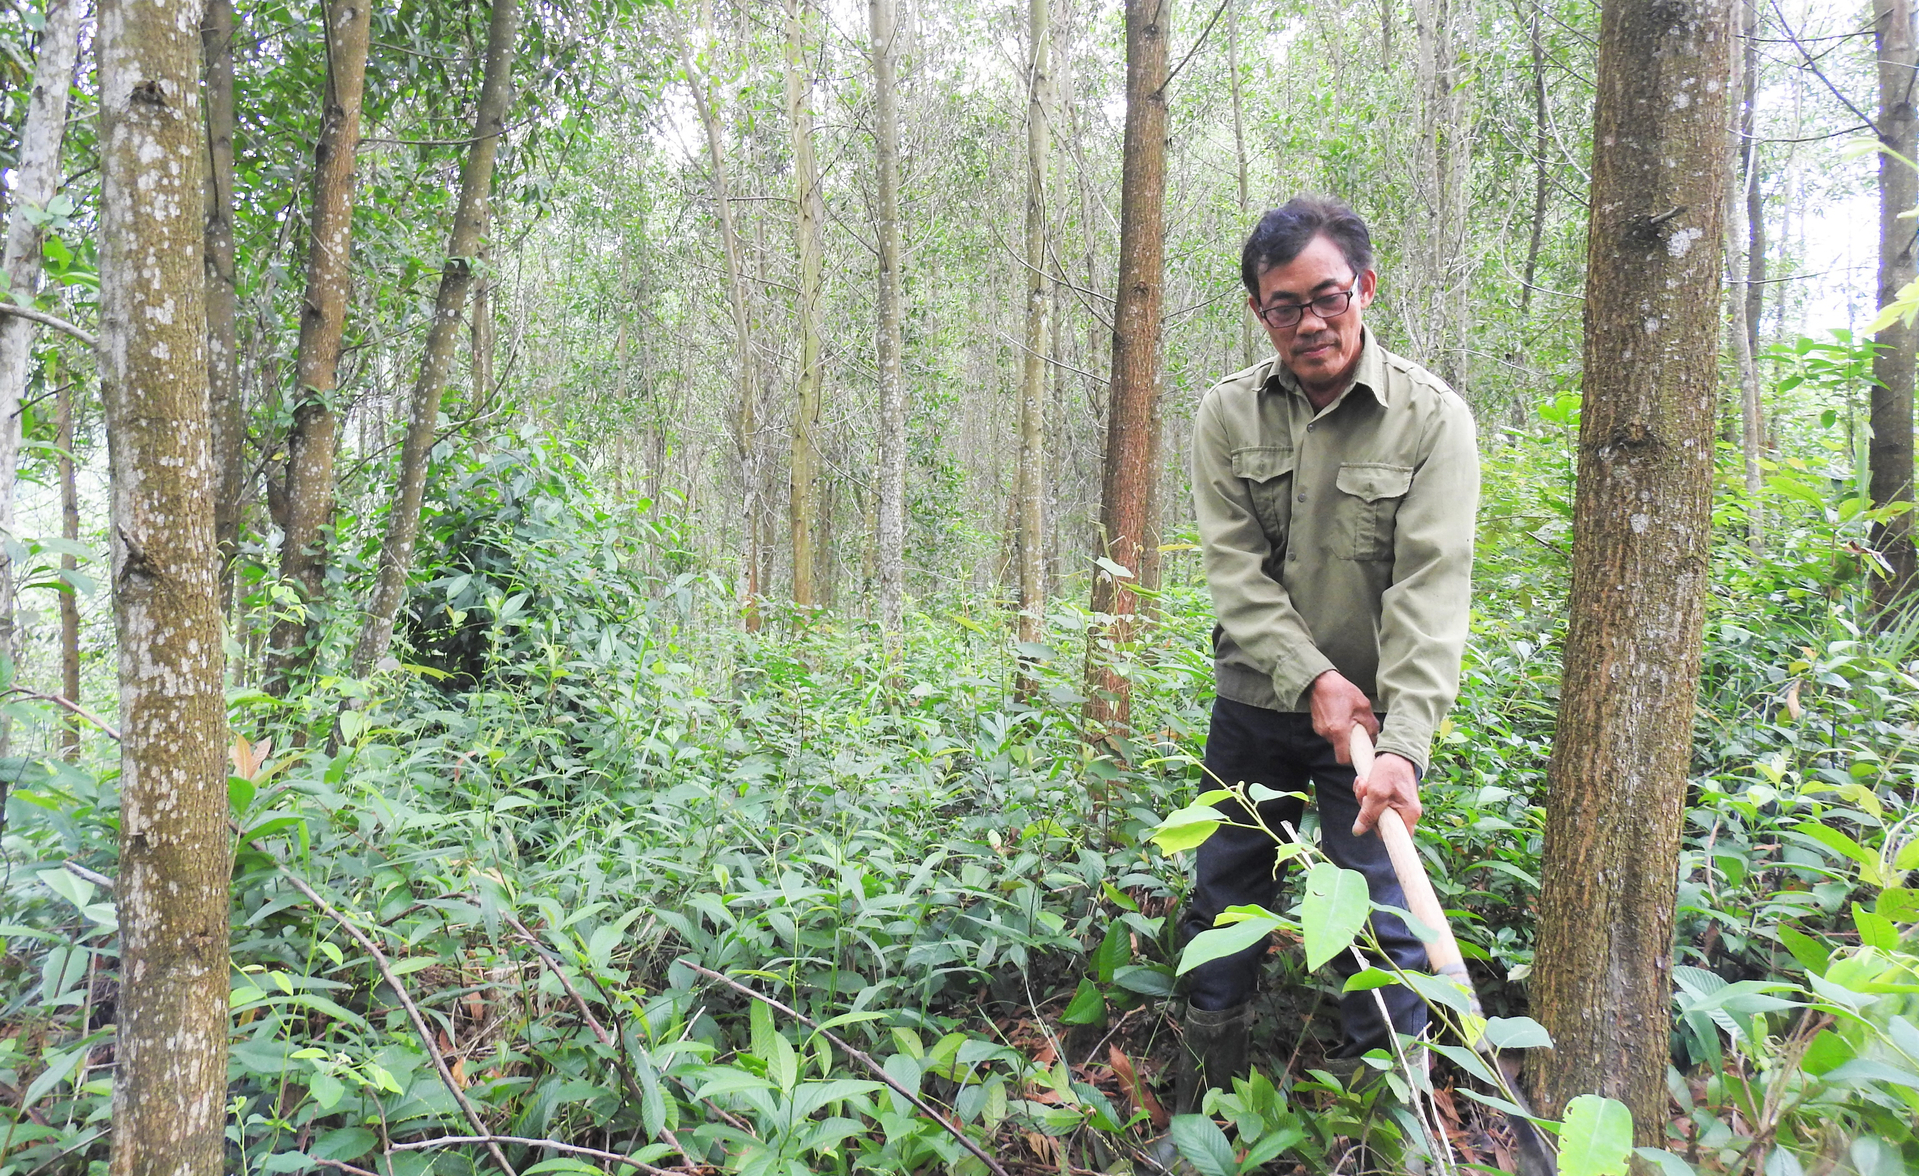 The efficiency of large wooden trunk plantations is much higher than regular forests, so Ha Tinh people are moving to sustainable forest management.